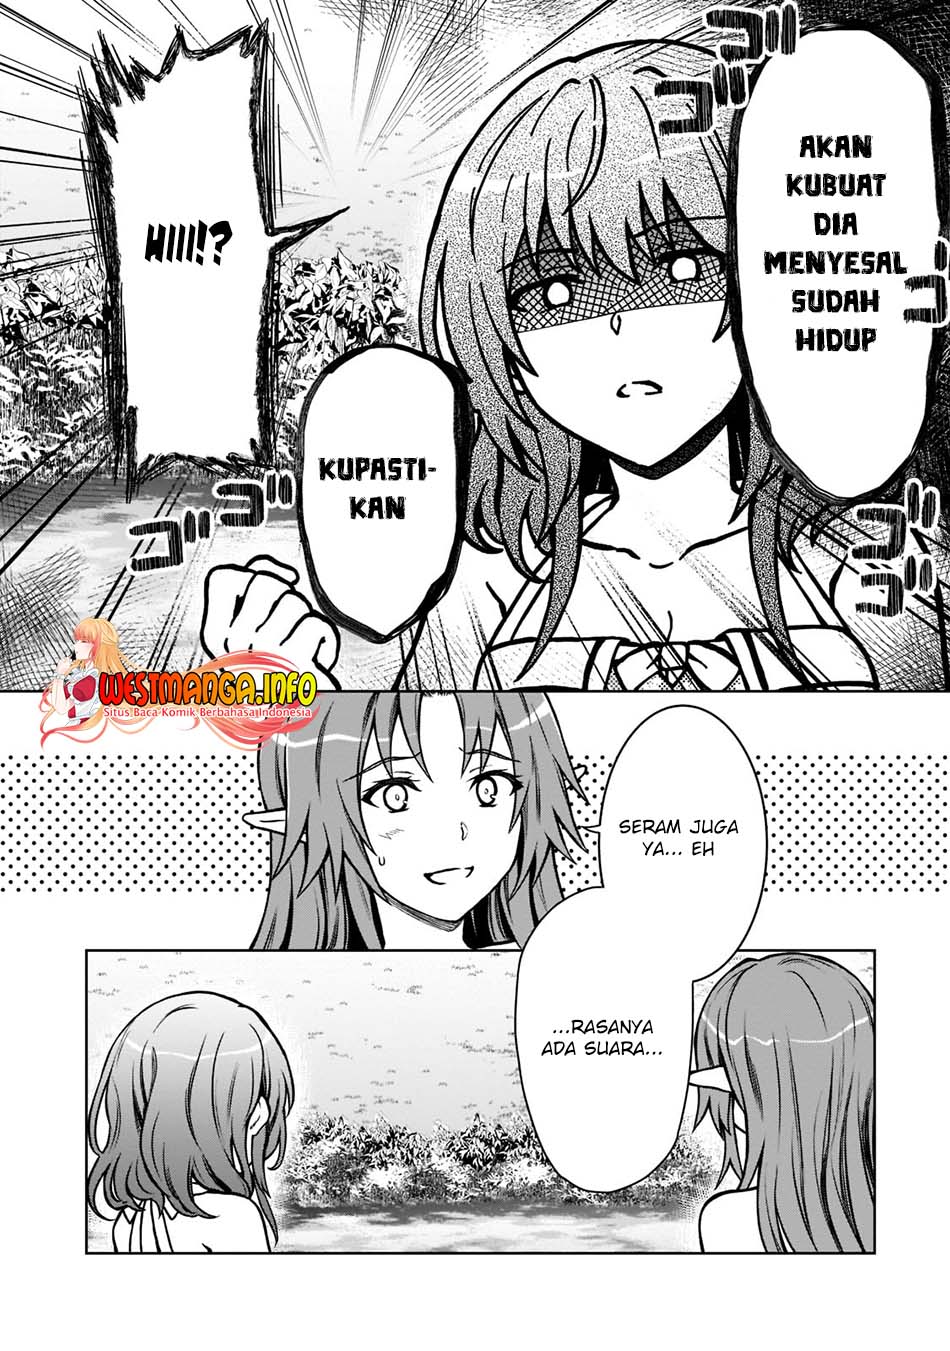 Dilarang COPAS - situs resmi www.mangacanblog.com - Komik d rank adventurer invited by a brave party and the stalking princess 008 - chapter 8 9 Indonesia d rank adventurer invited by a brave party and the stalking princess 008 - chapter 8 Terbaru 12|Baca Manga Komik Indonesia|Mangacan